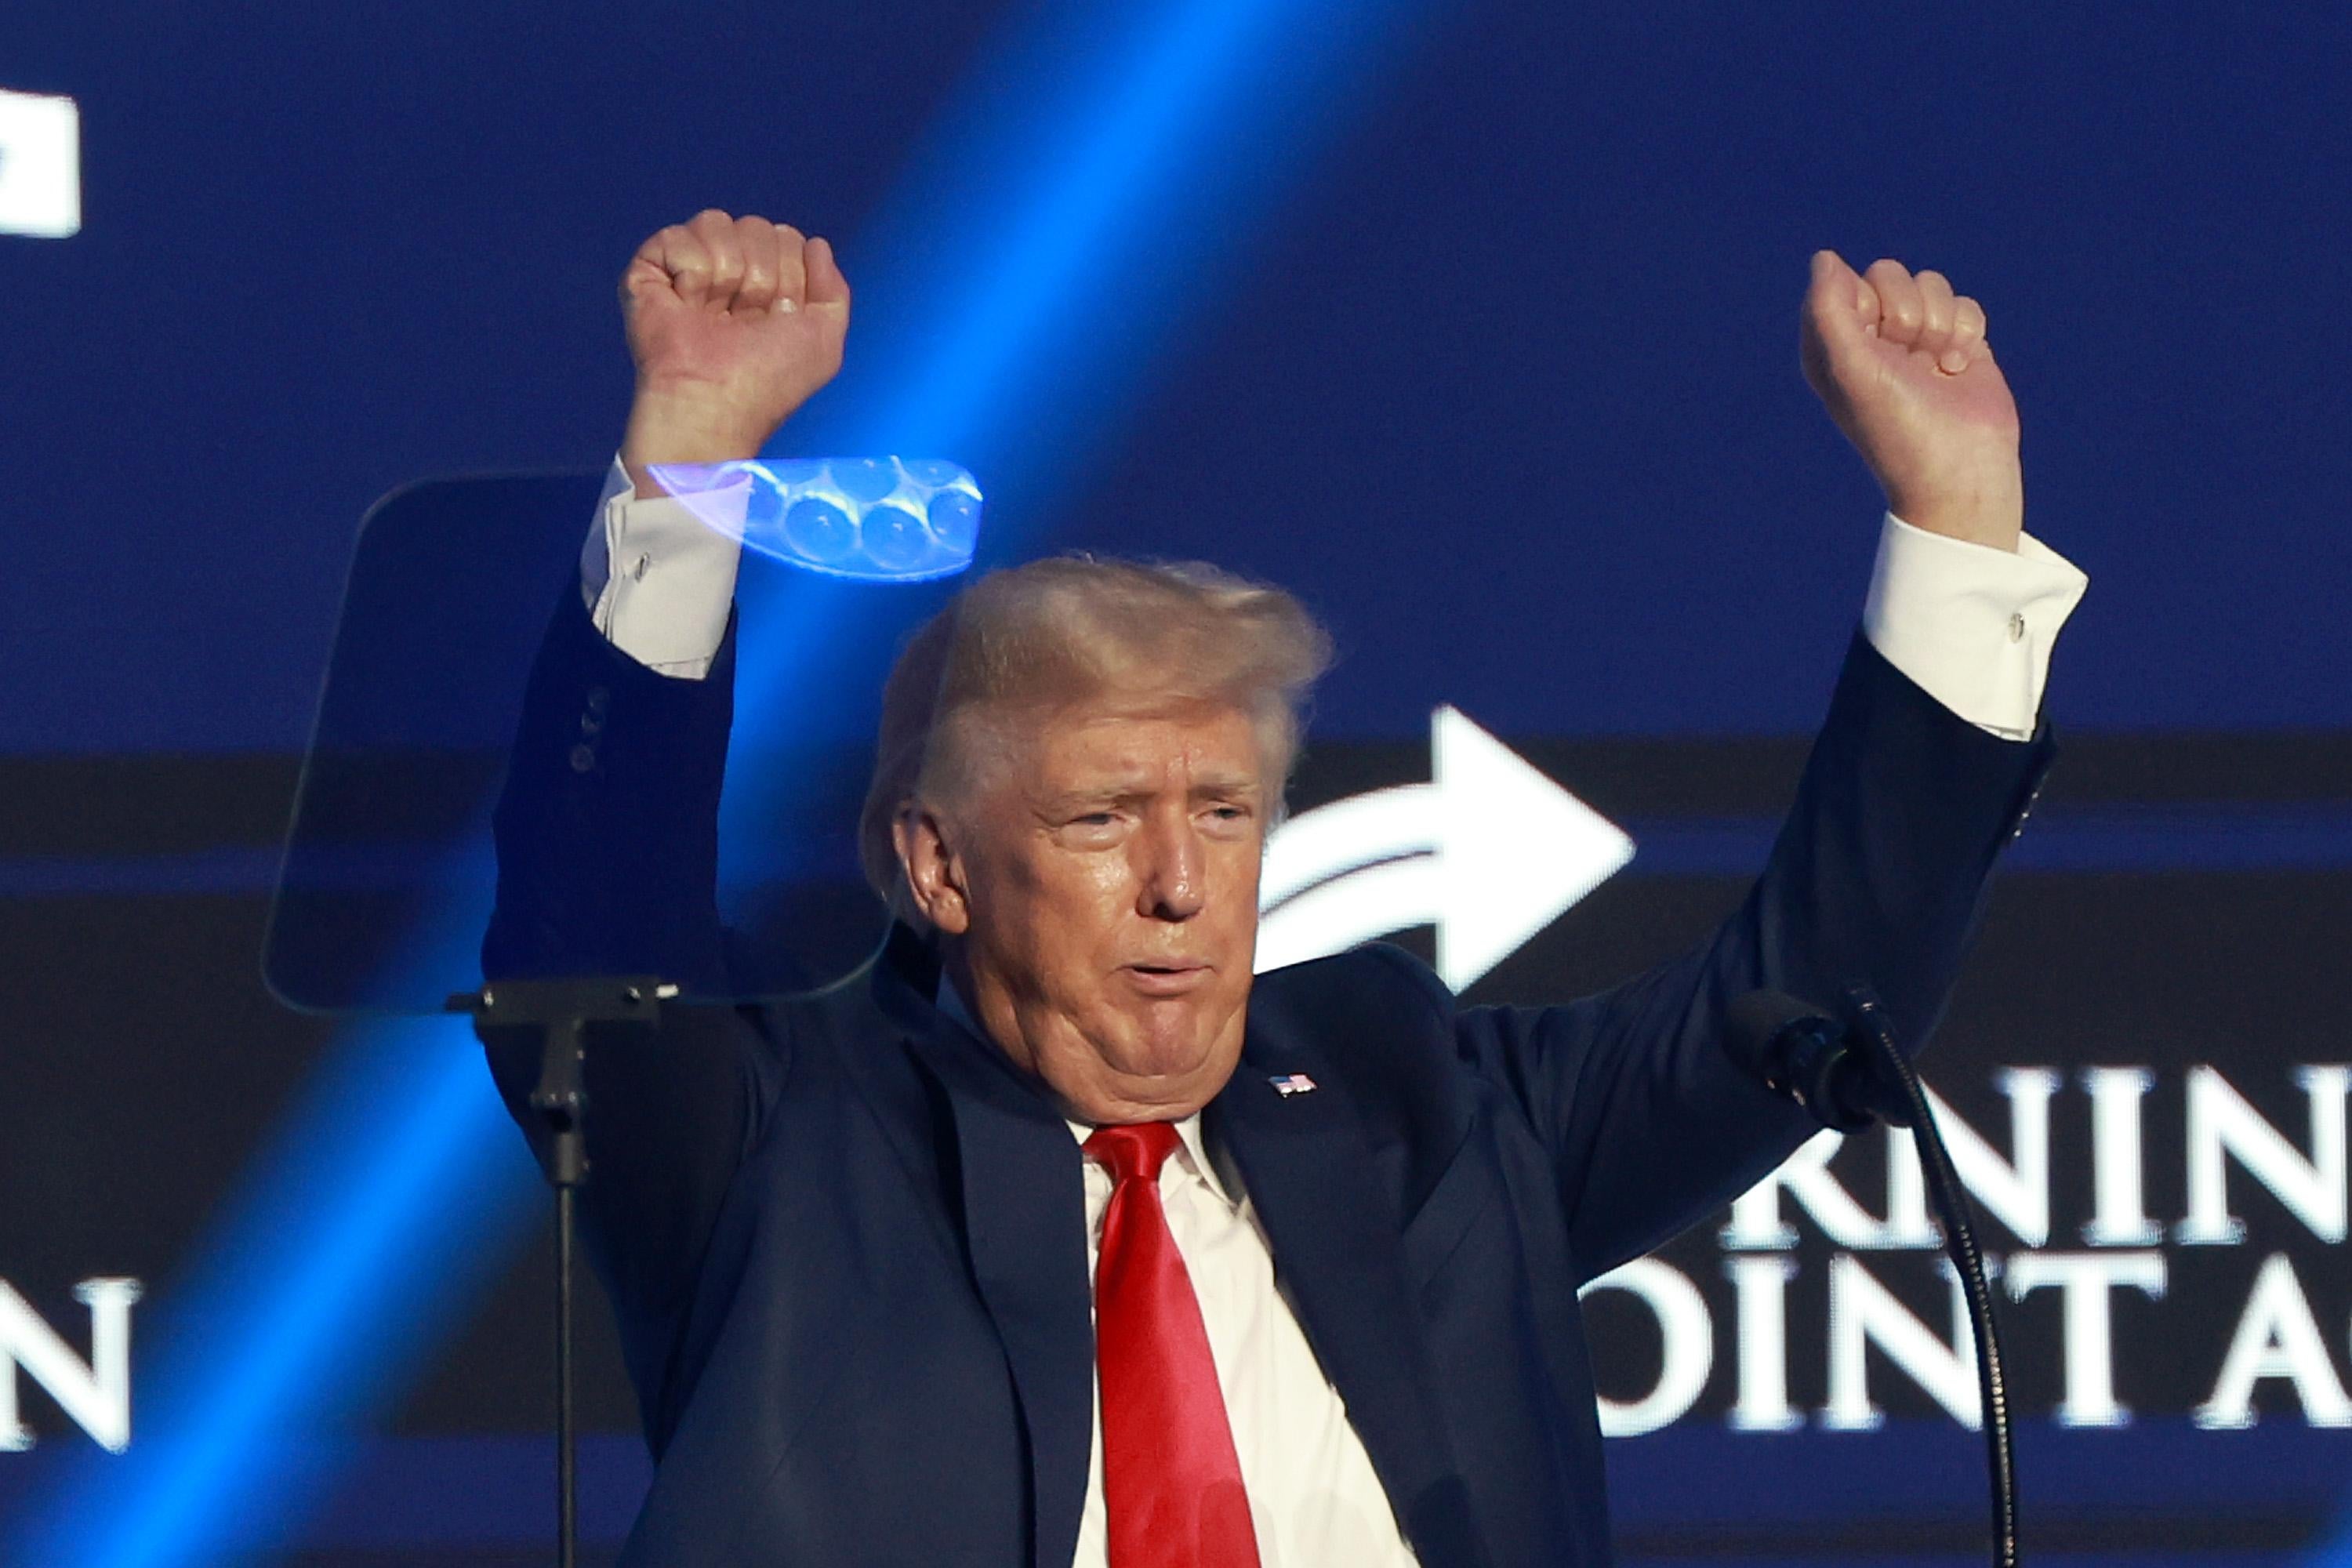 Trump sticks his hands in his air near a teleprompter, looks worried.